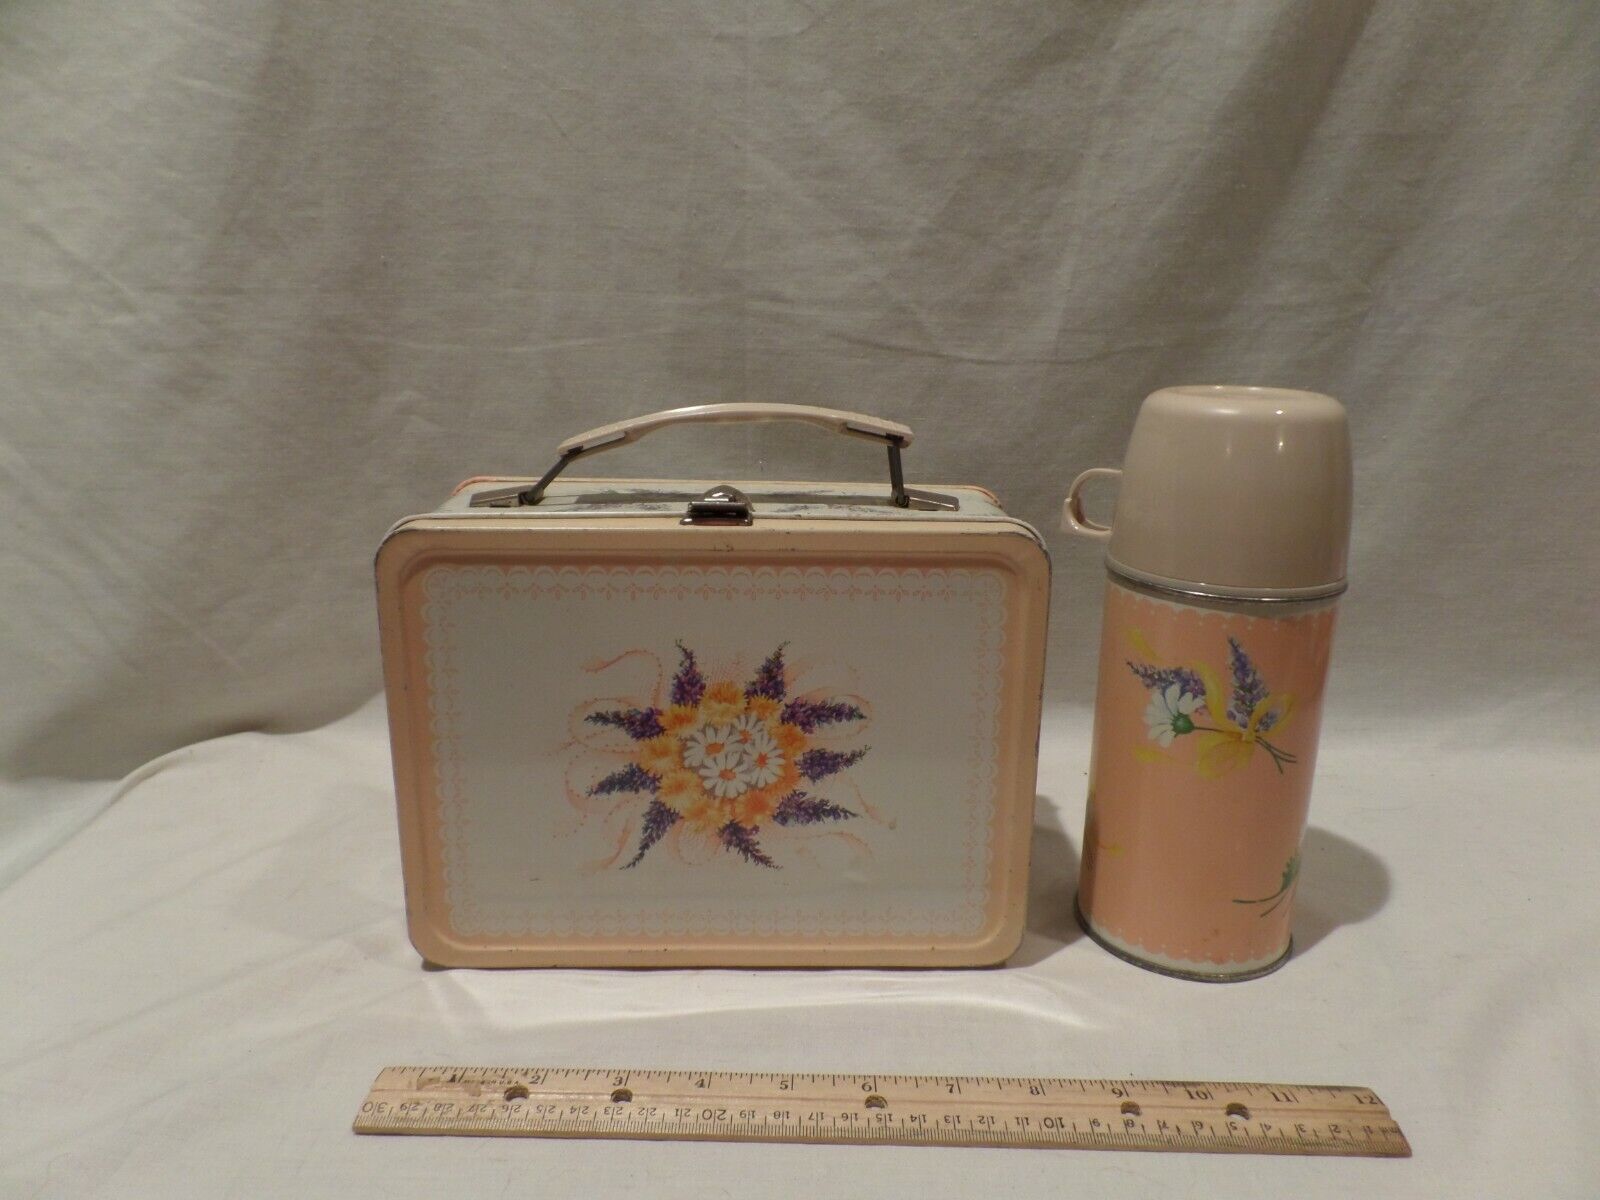 VINTAGE 1958 METAL FLORAL TIN LUNCH BOX WITH THERMOS BY THERMOS BRAND